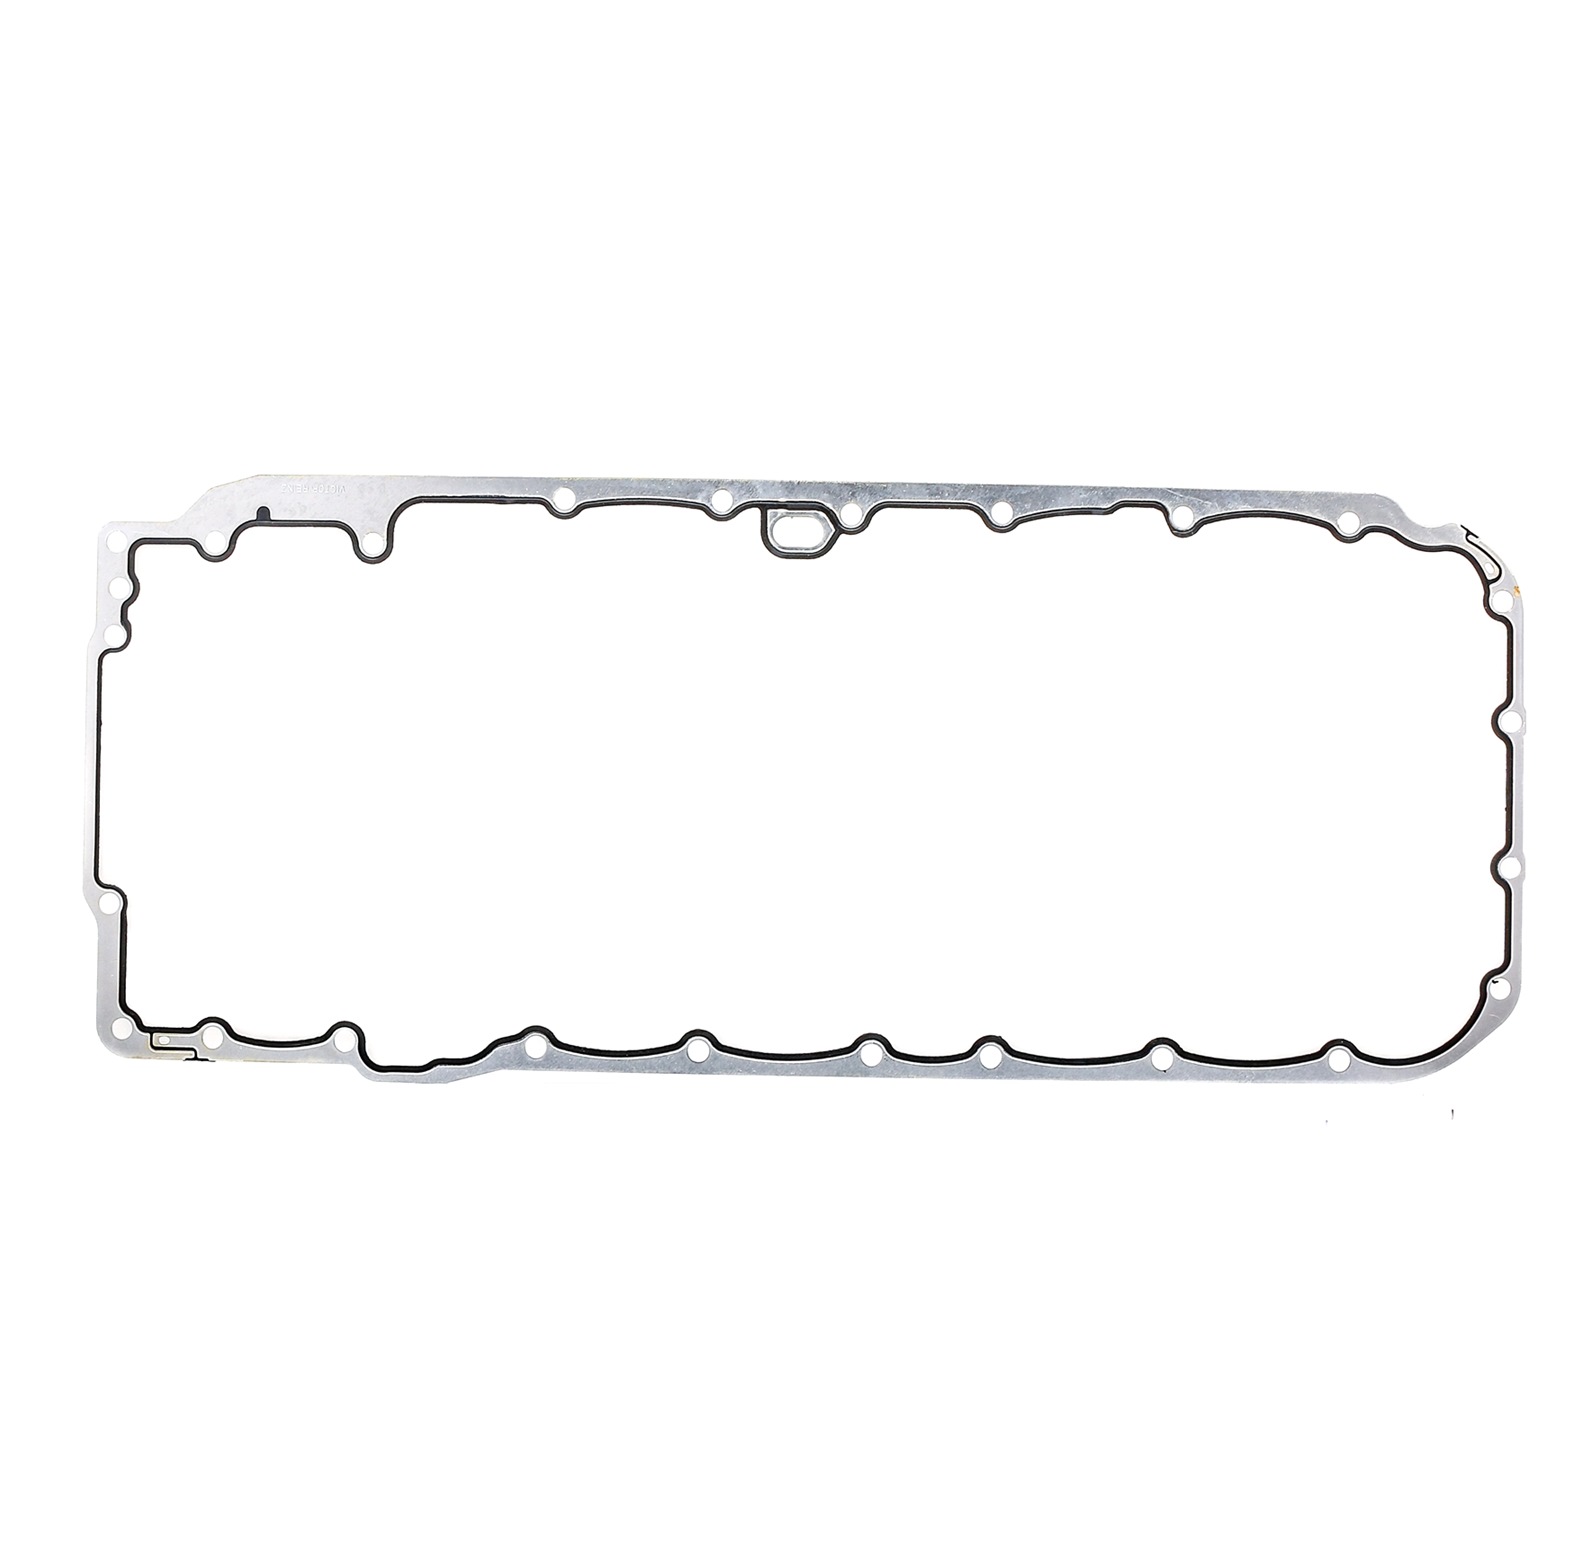 BMW Oil sump gasket REINZ 71-41294-00 at a good price